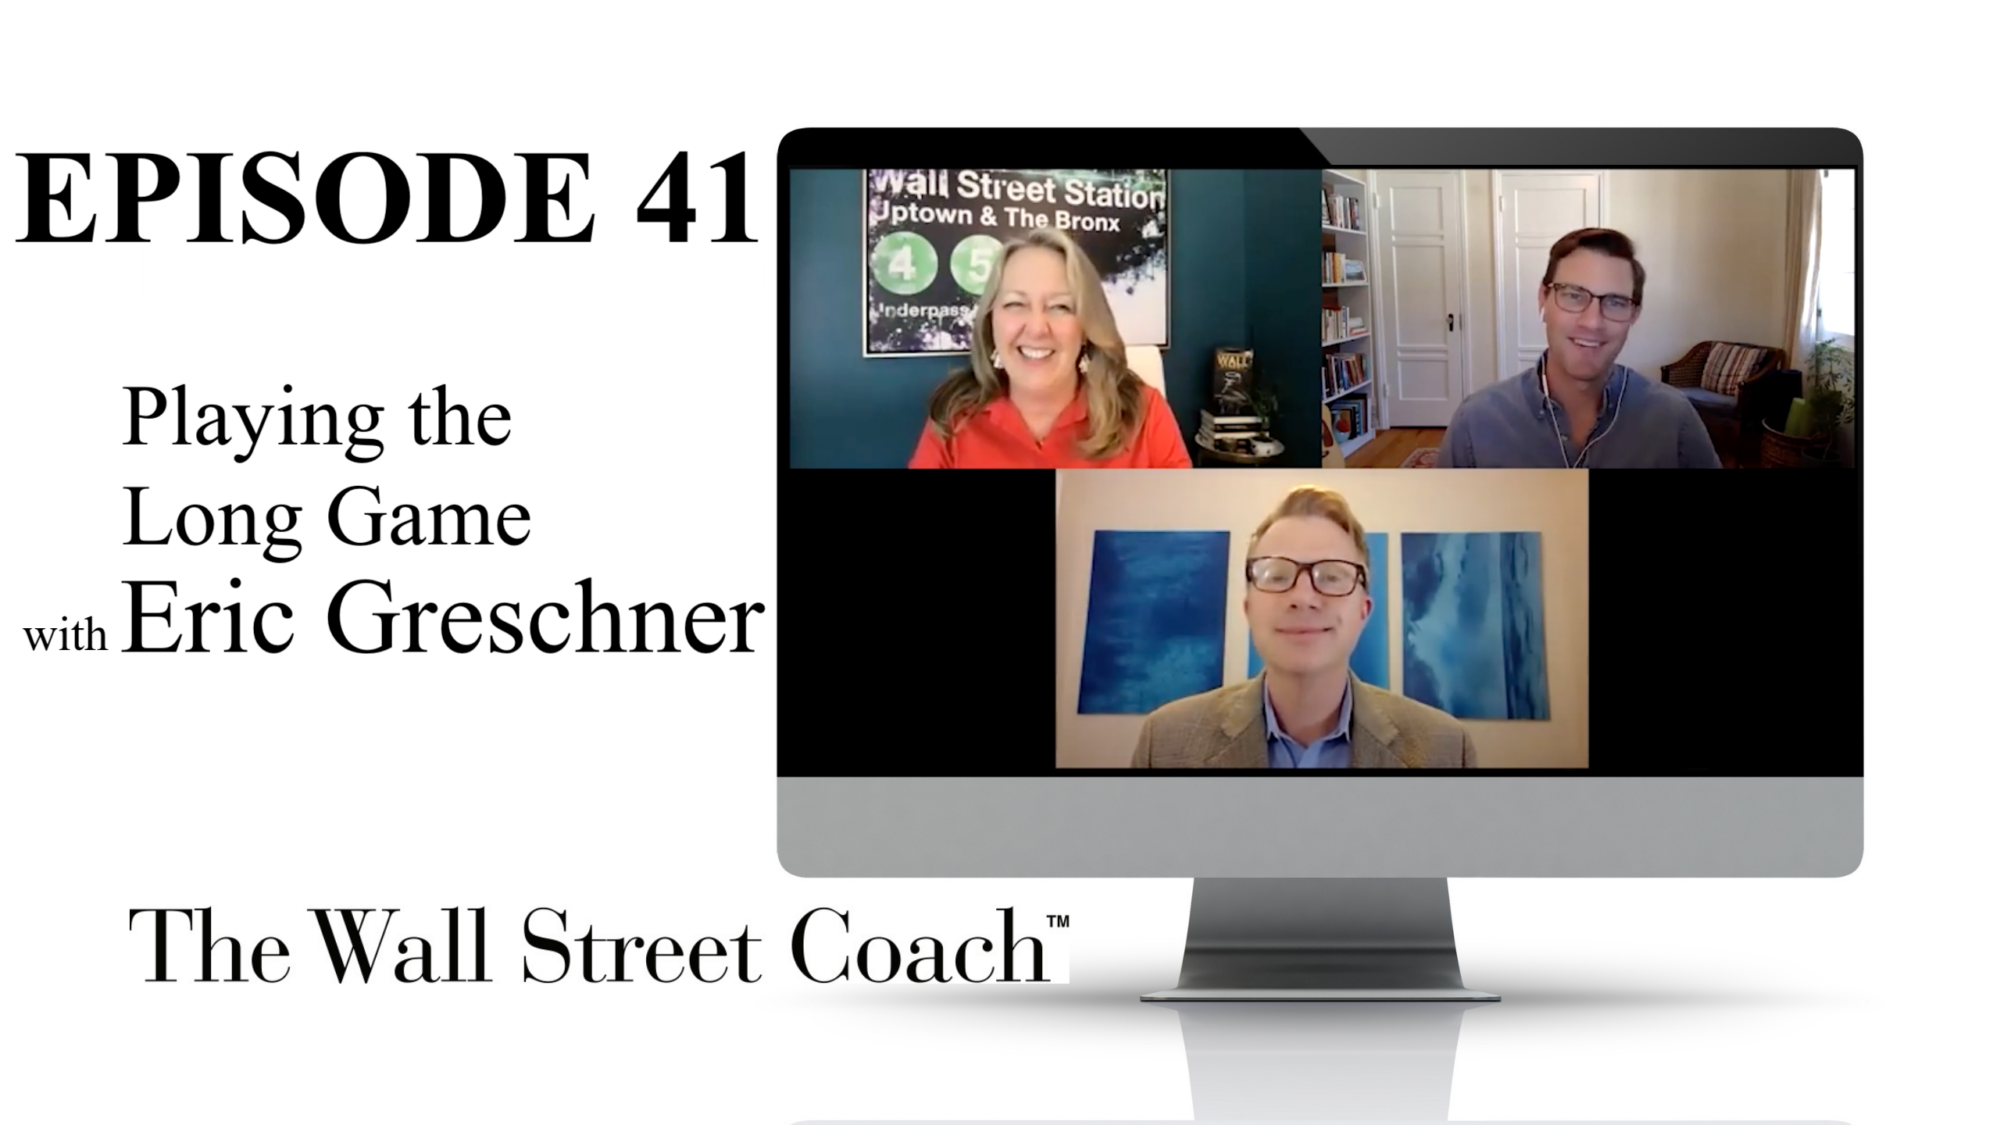 Episode 41: Playing the Long Game with Eric Greschner